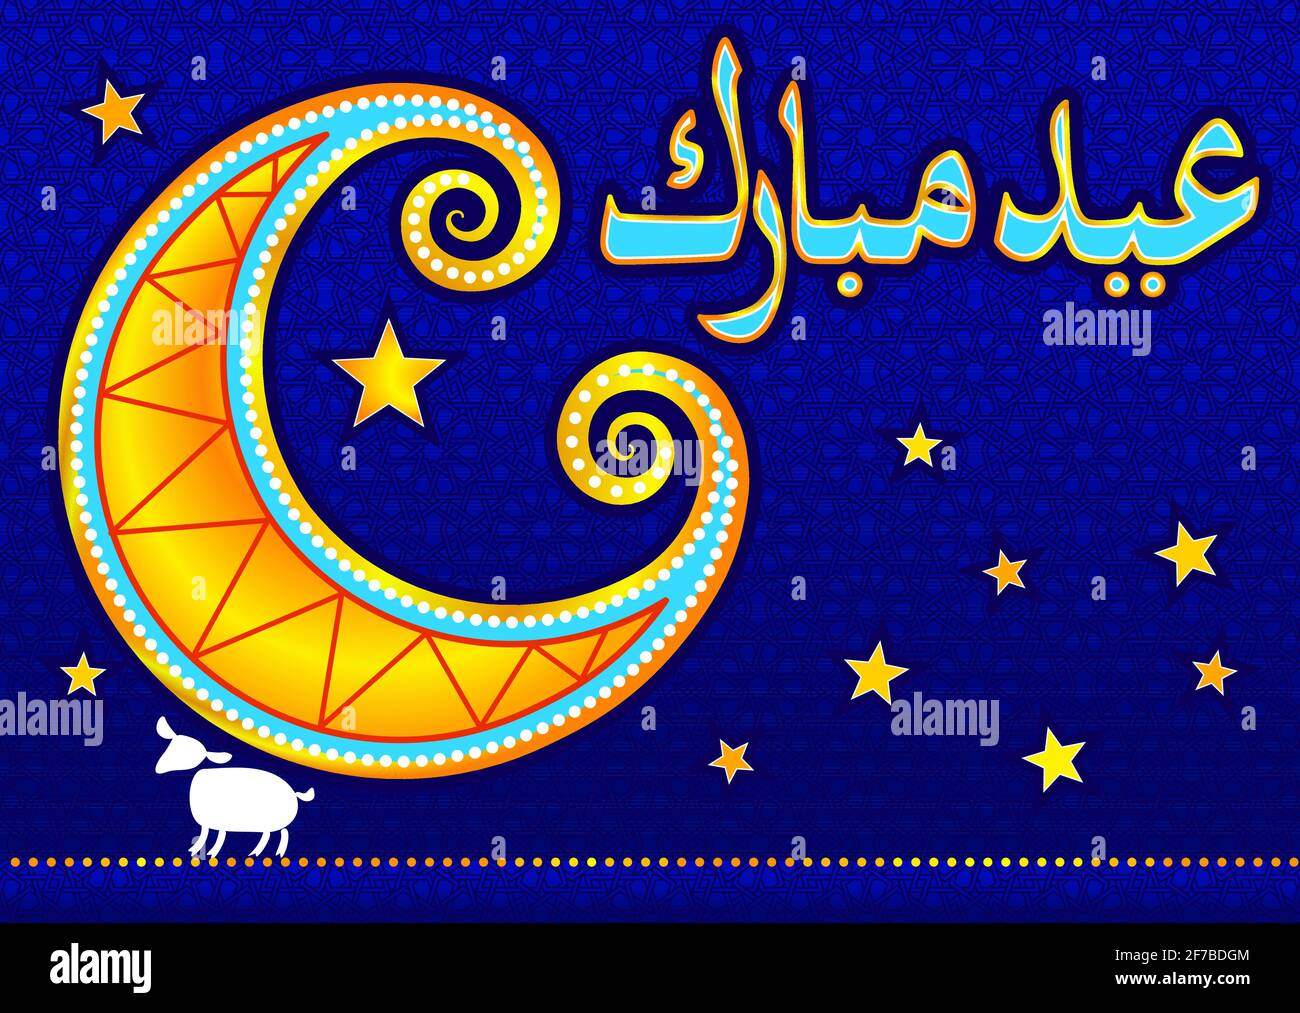 Greeting card for the Islam holiday Eid al-Adha. The  moon, Arabic ornament, congratulations  Eid Mubarak (Blessed Holiday), stars, a stylized lamb. Stock Vector